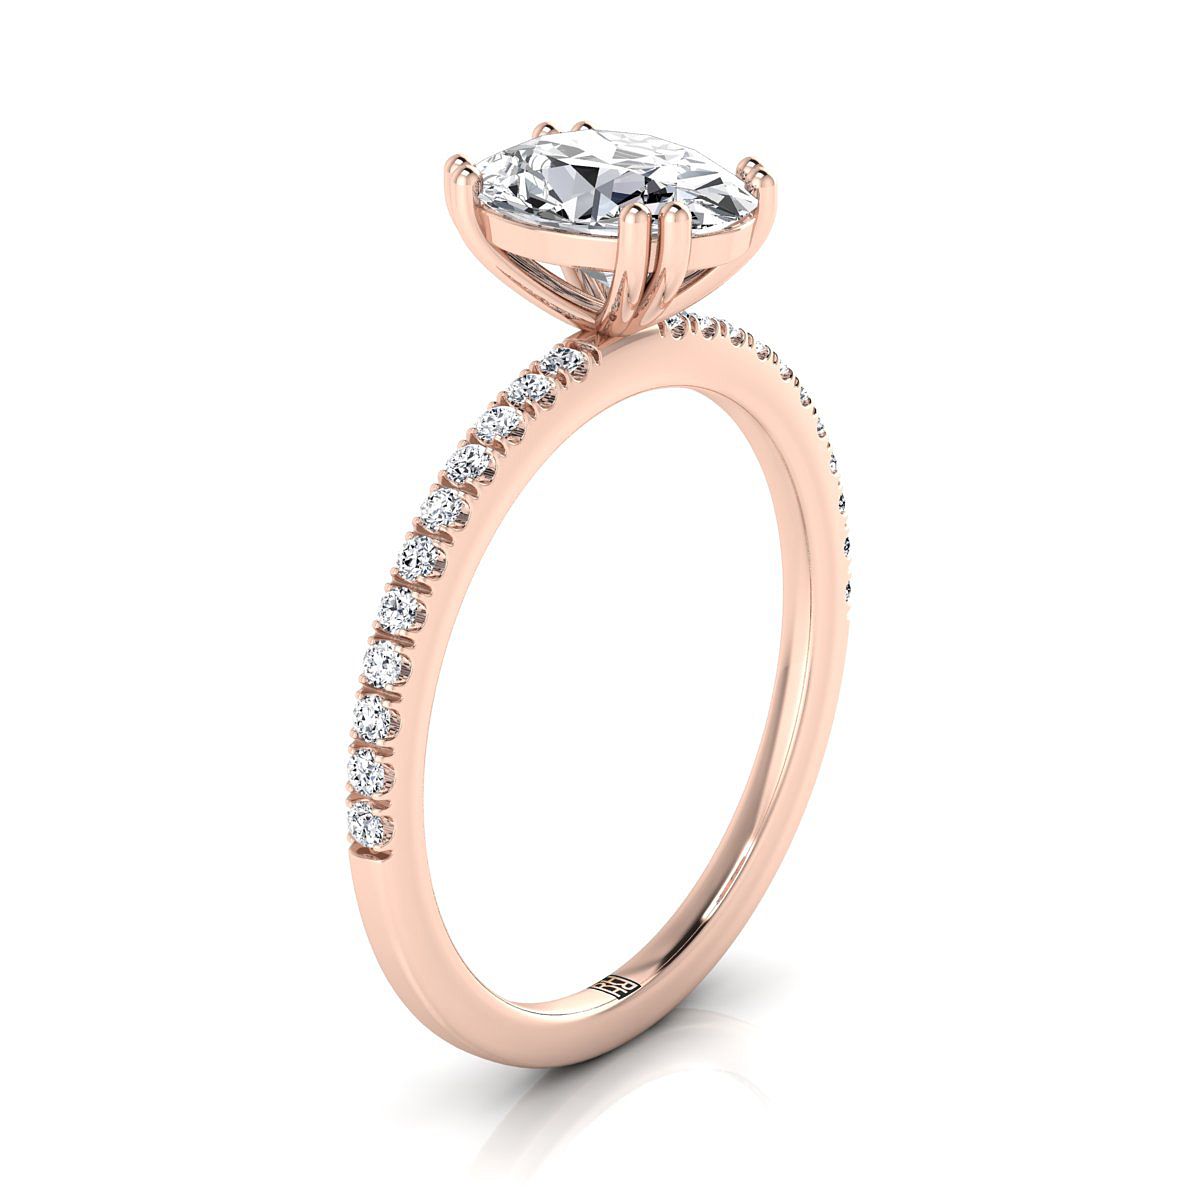 14K Rose Gold Oval Citrine Simple French Pave Double Claw Prong Diamond Engagement Ring -1/6ctw